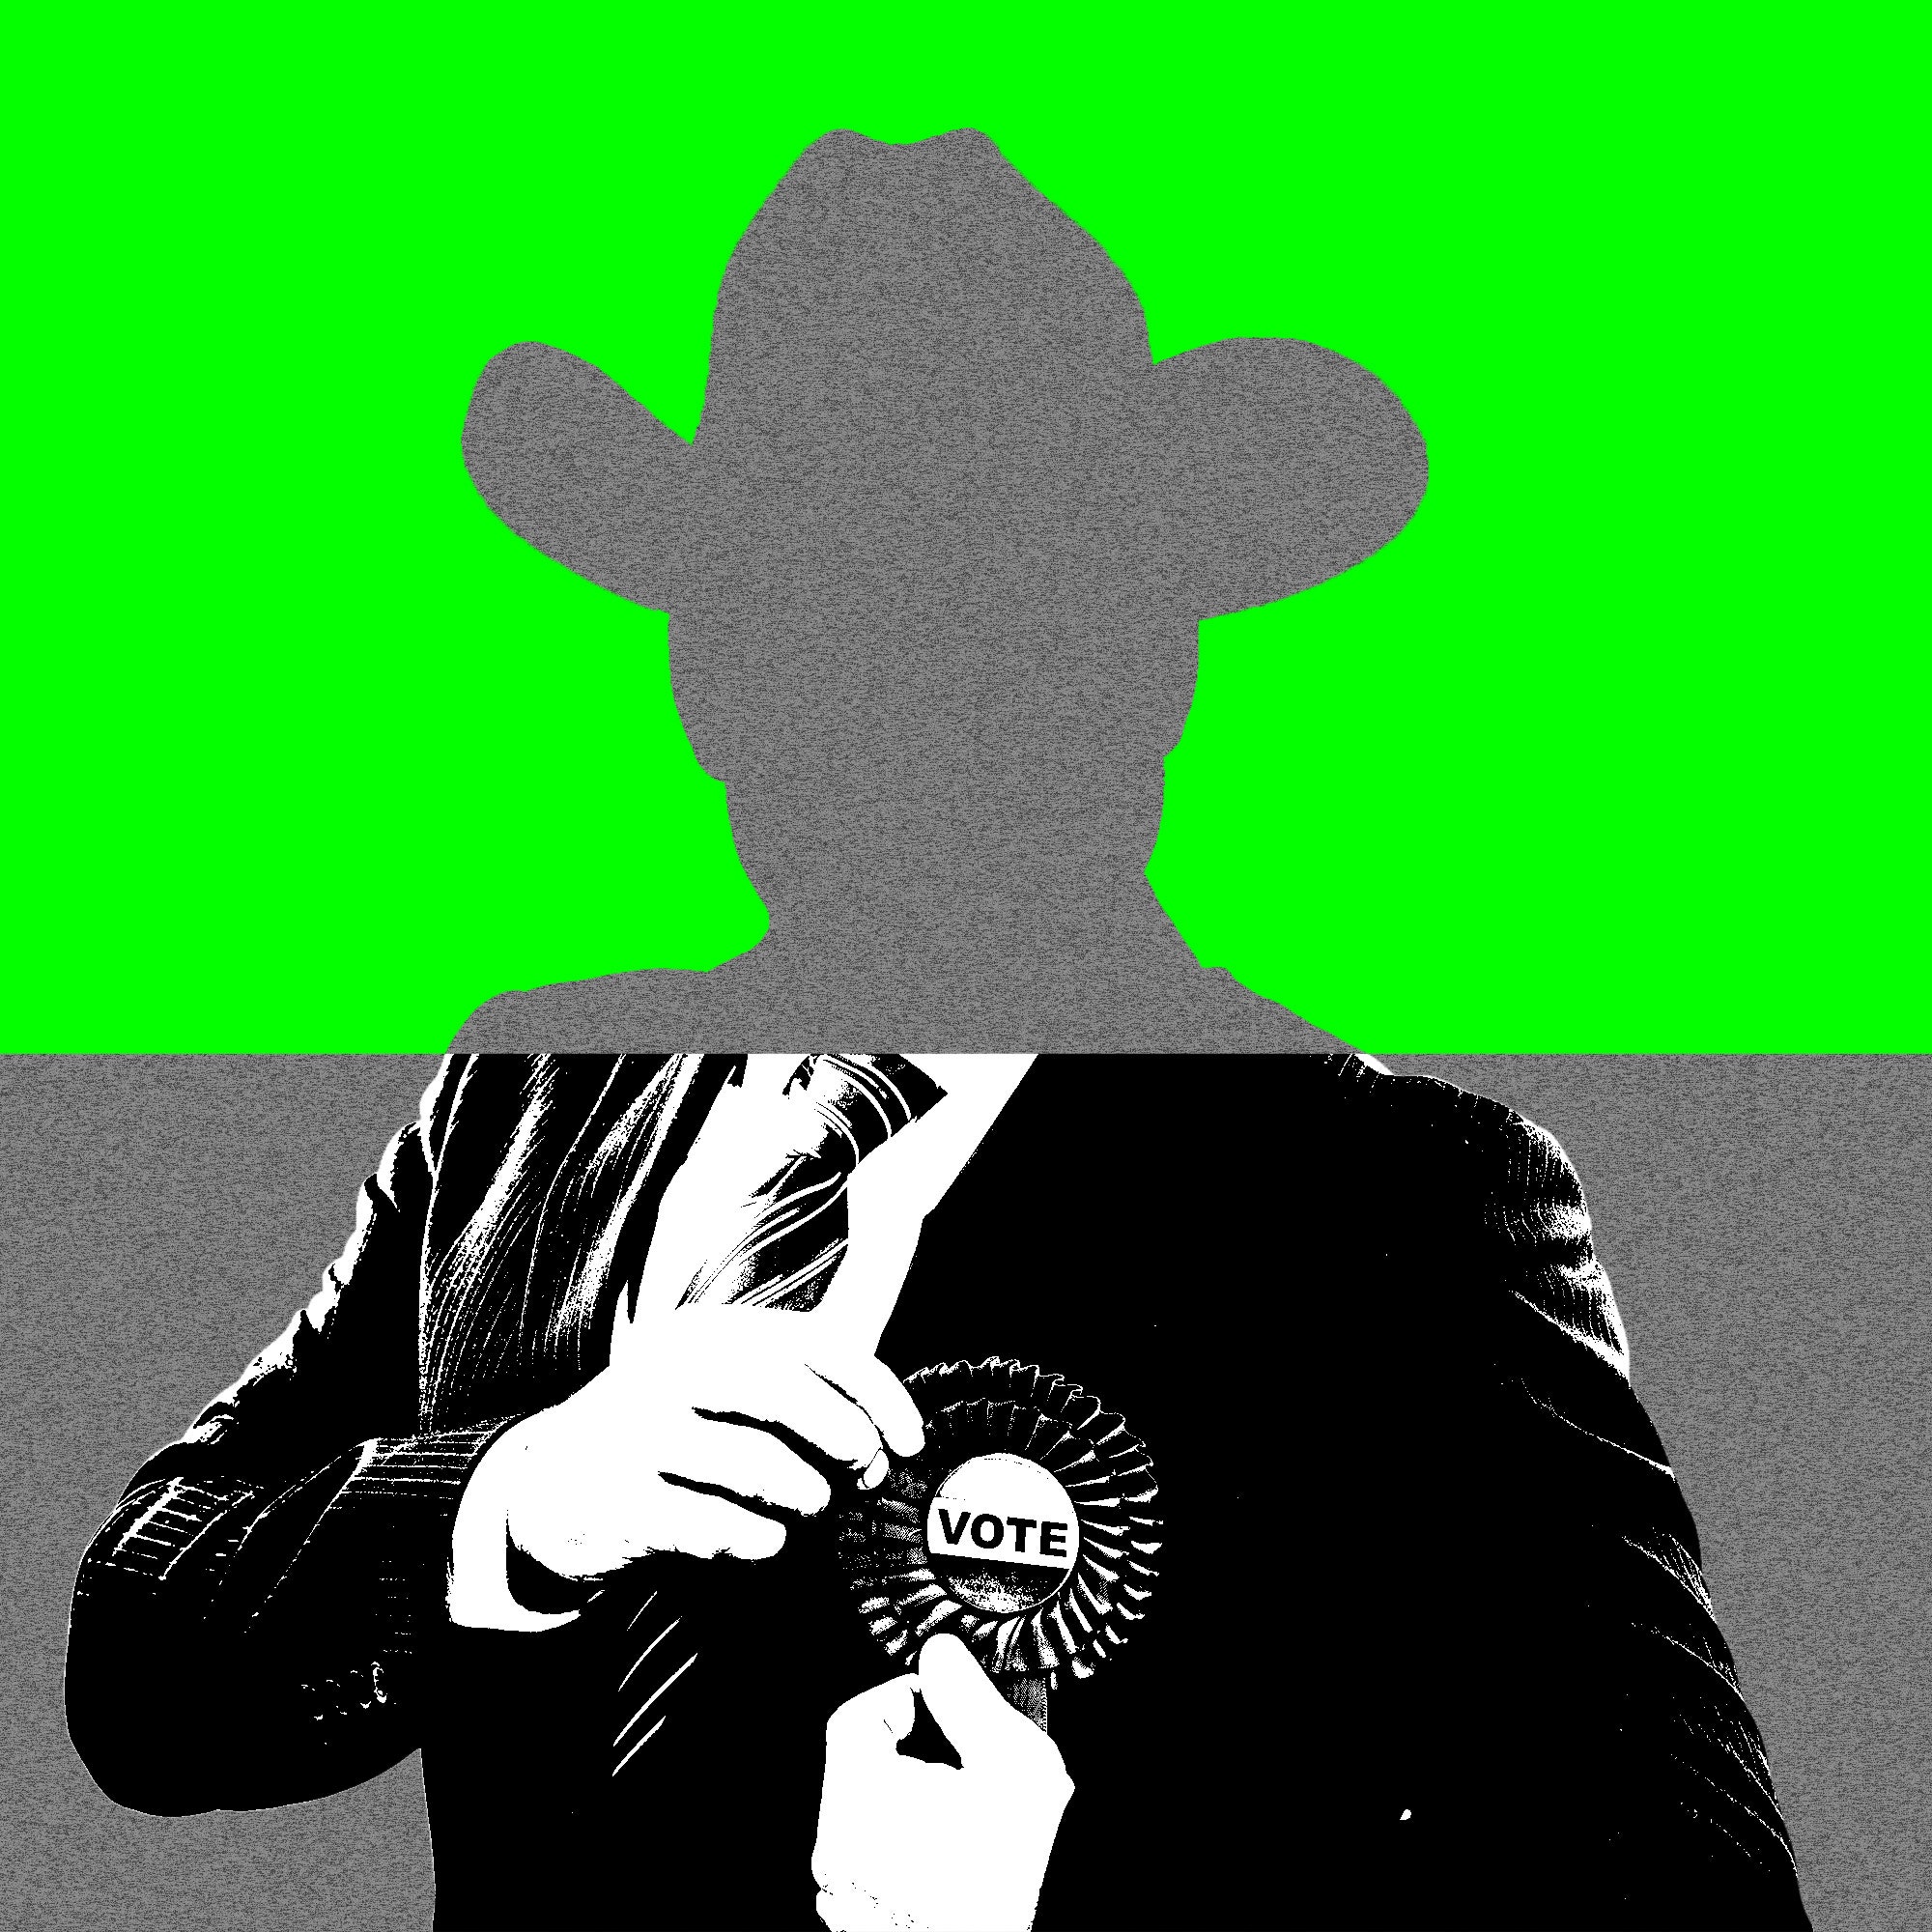 Collage of a figure in a suit with a vote button with just a silhouette for a head wearing a cowboy hat